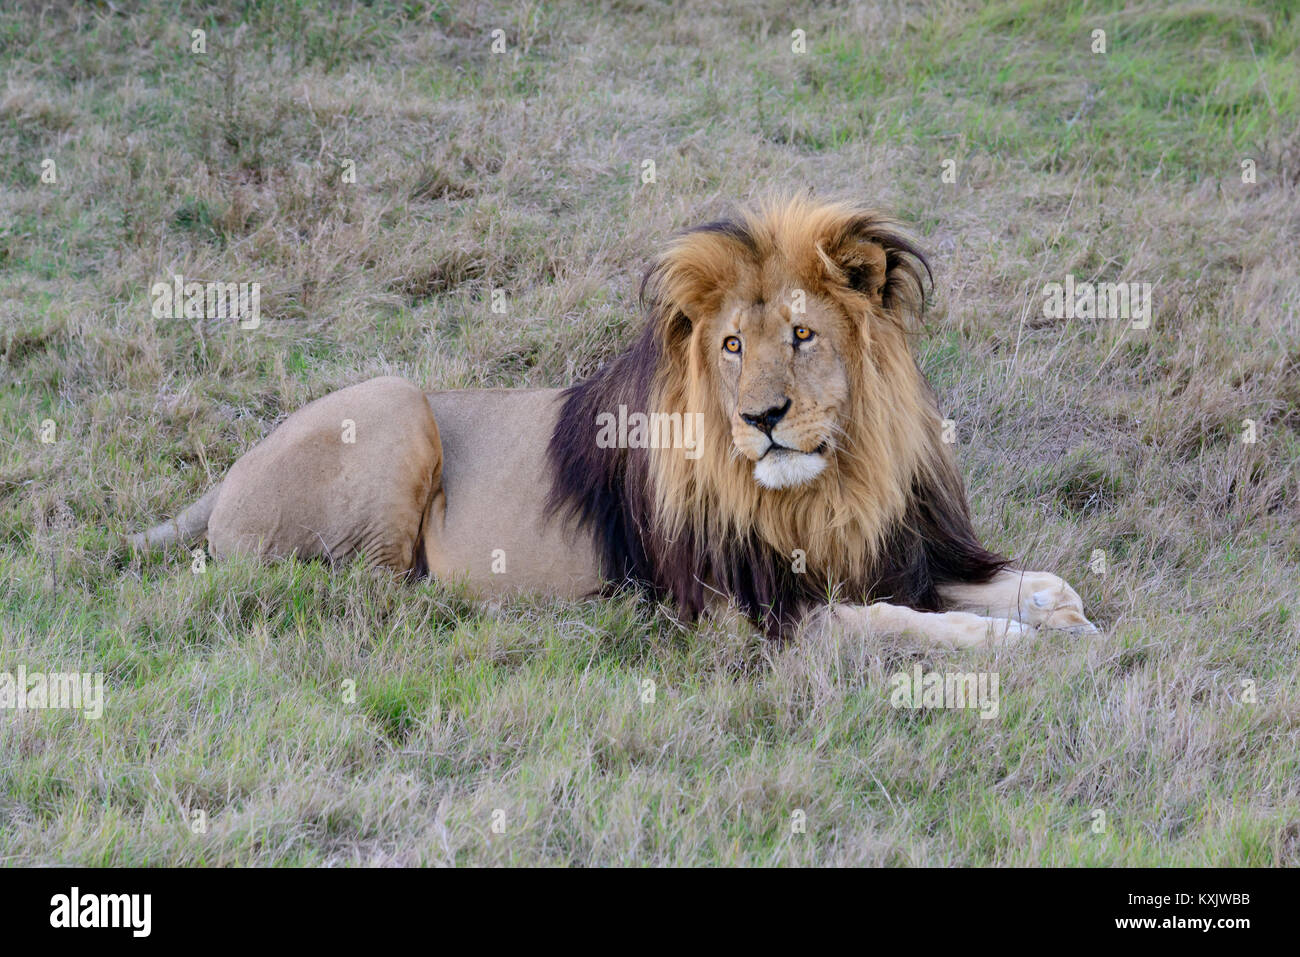 Cape Lion or South african lion, male, Panthera leo, South Africa, Porth Elizabeth, Schotia Safaris Private Game Reserve park Stock Photo